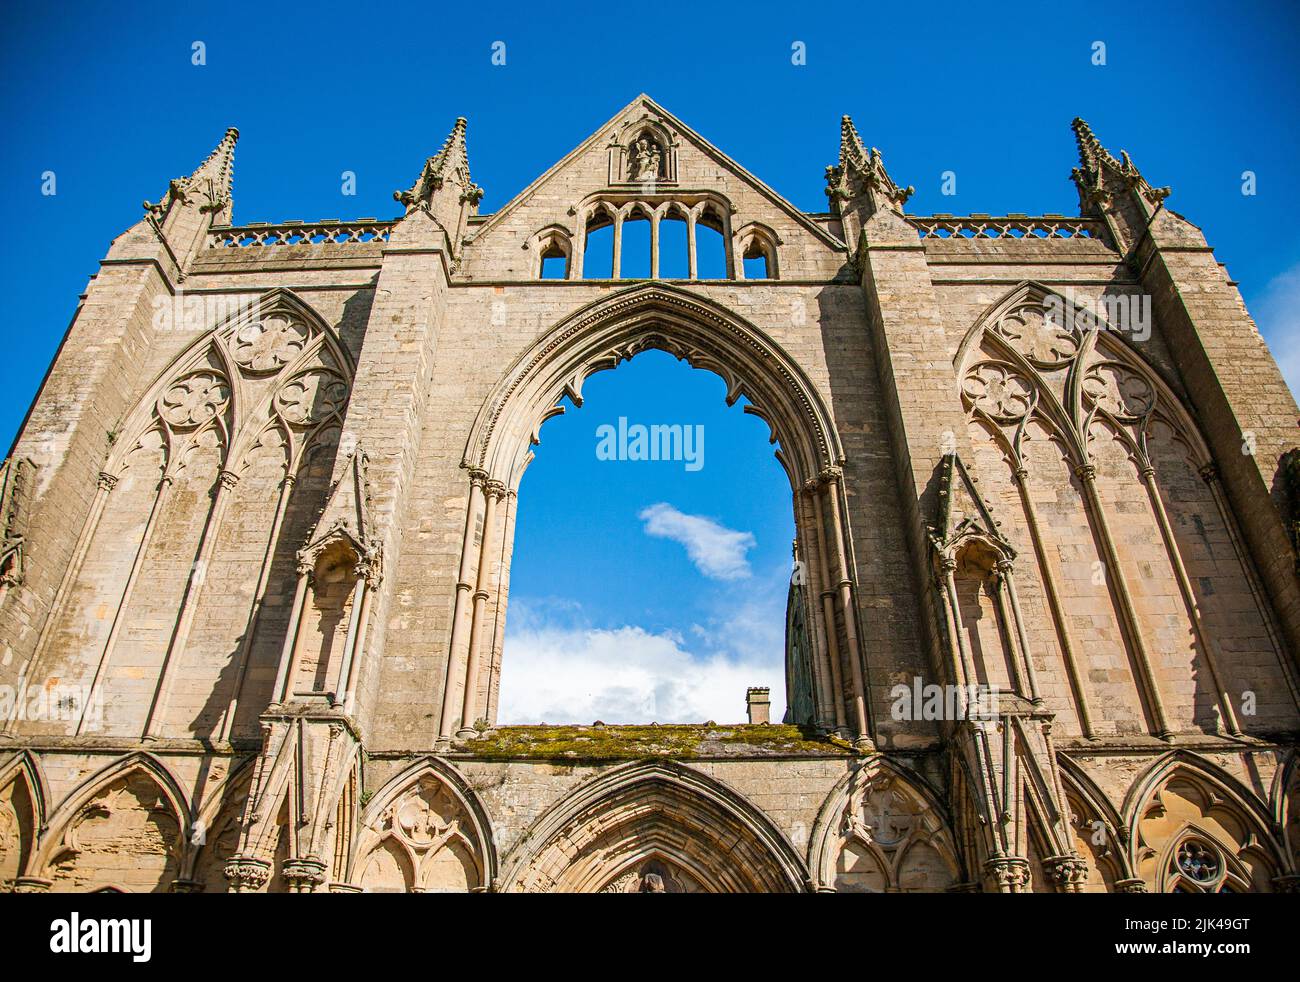 Remains of monastic buildings at Newstead Abbey in Nottinghamshire UK Stock Photo